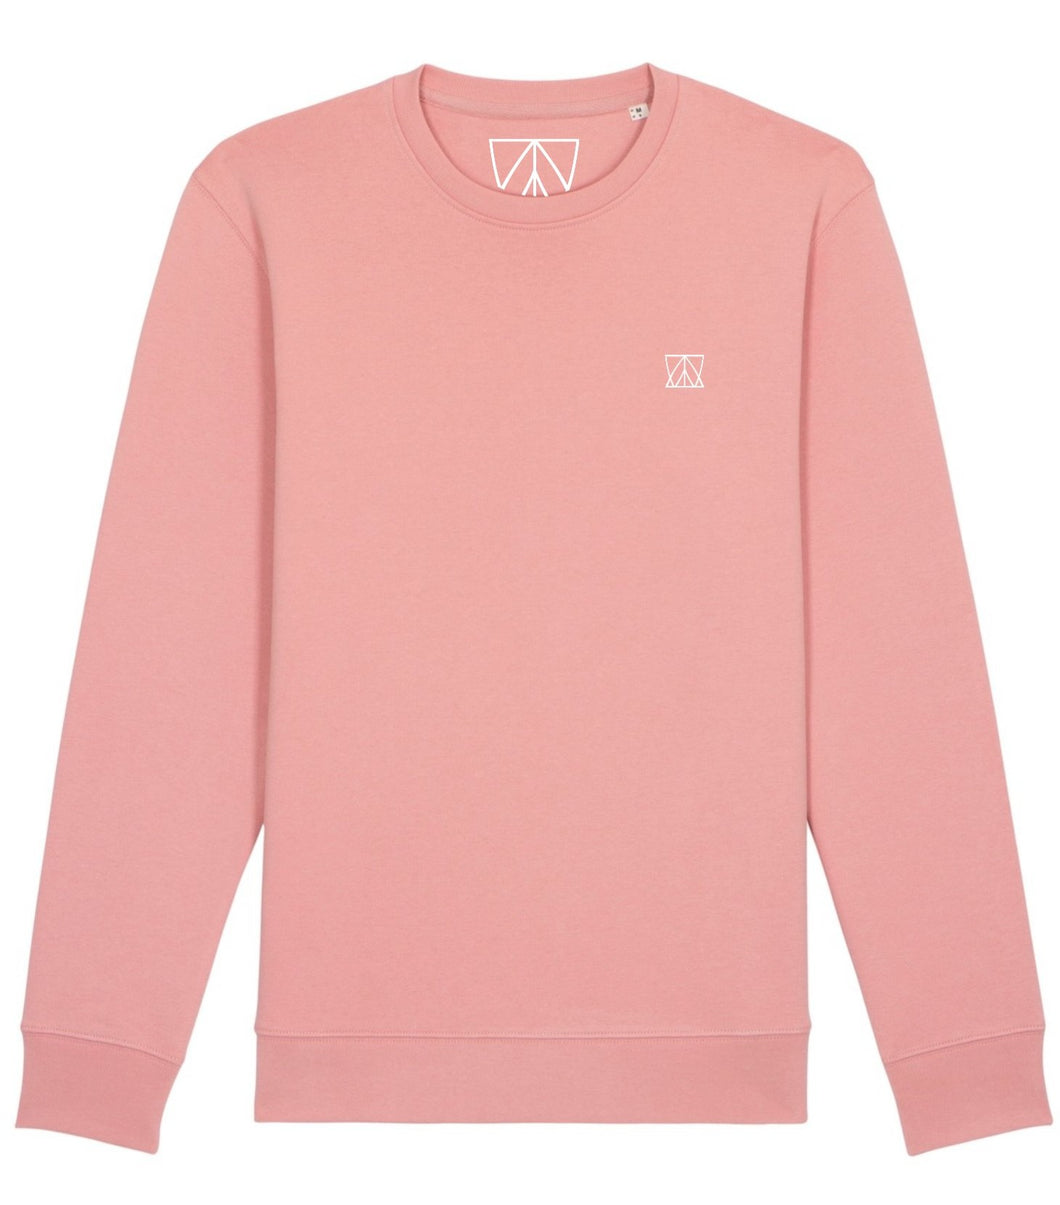 Sweater changer S&B unisex (canyon pink)